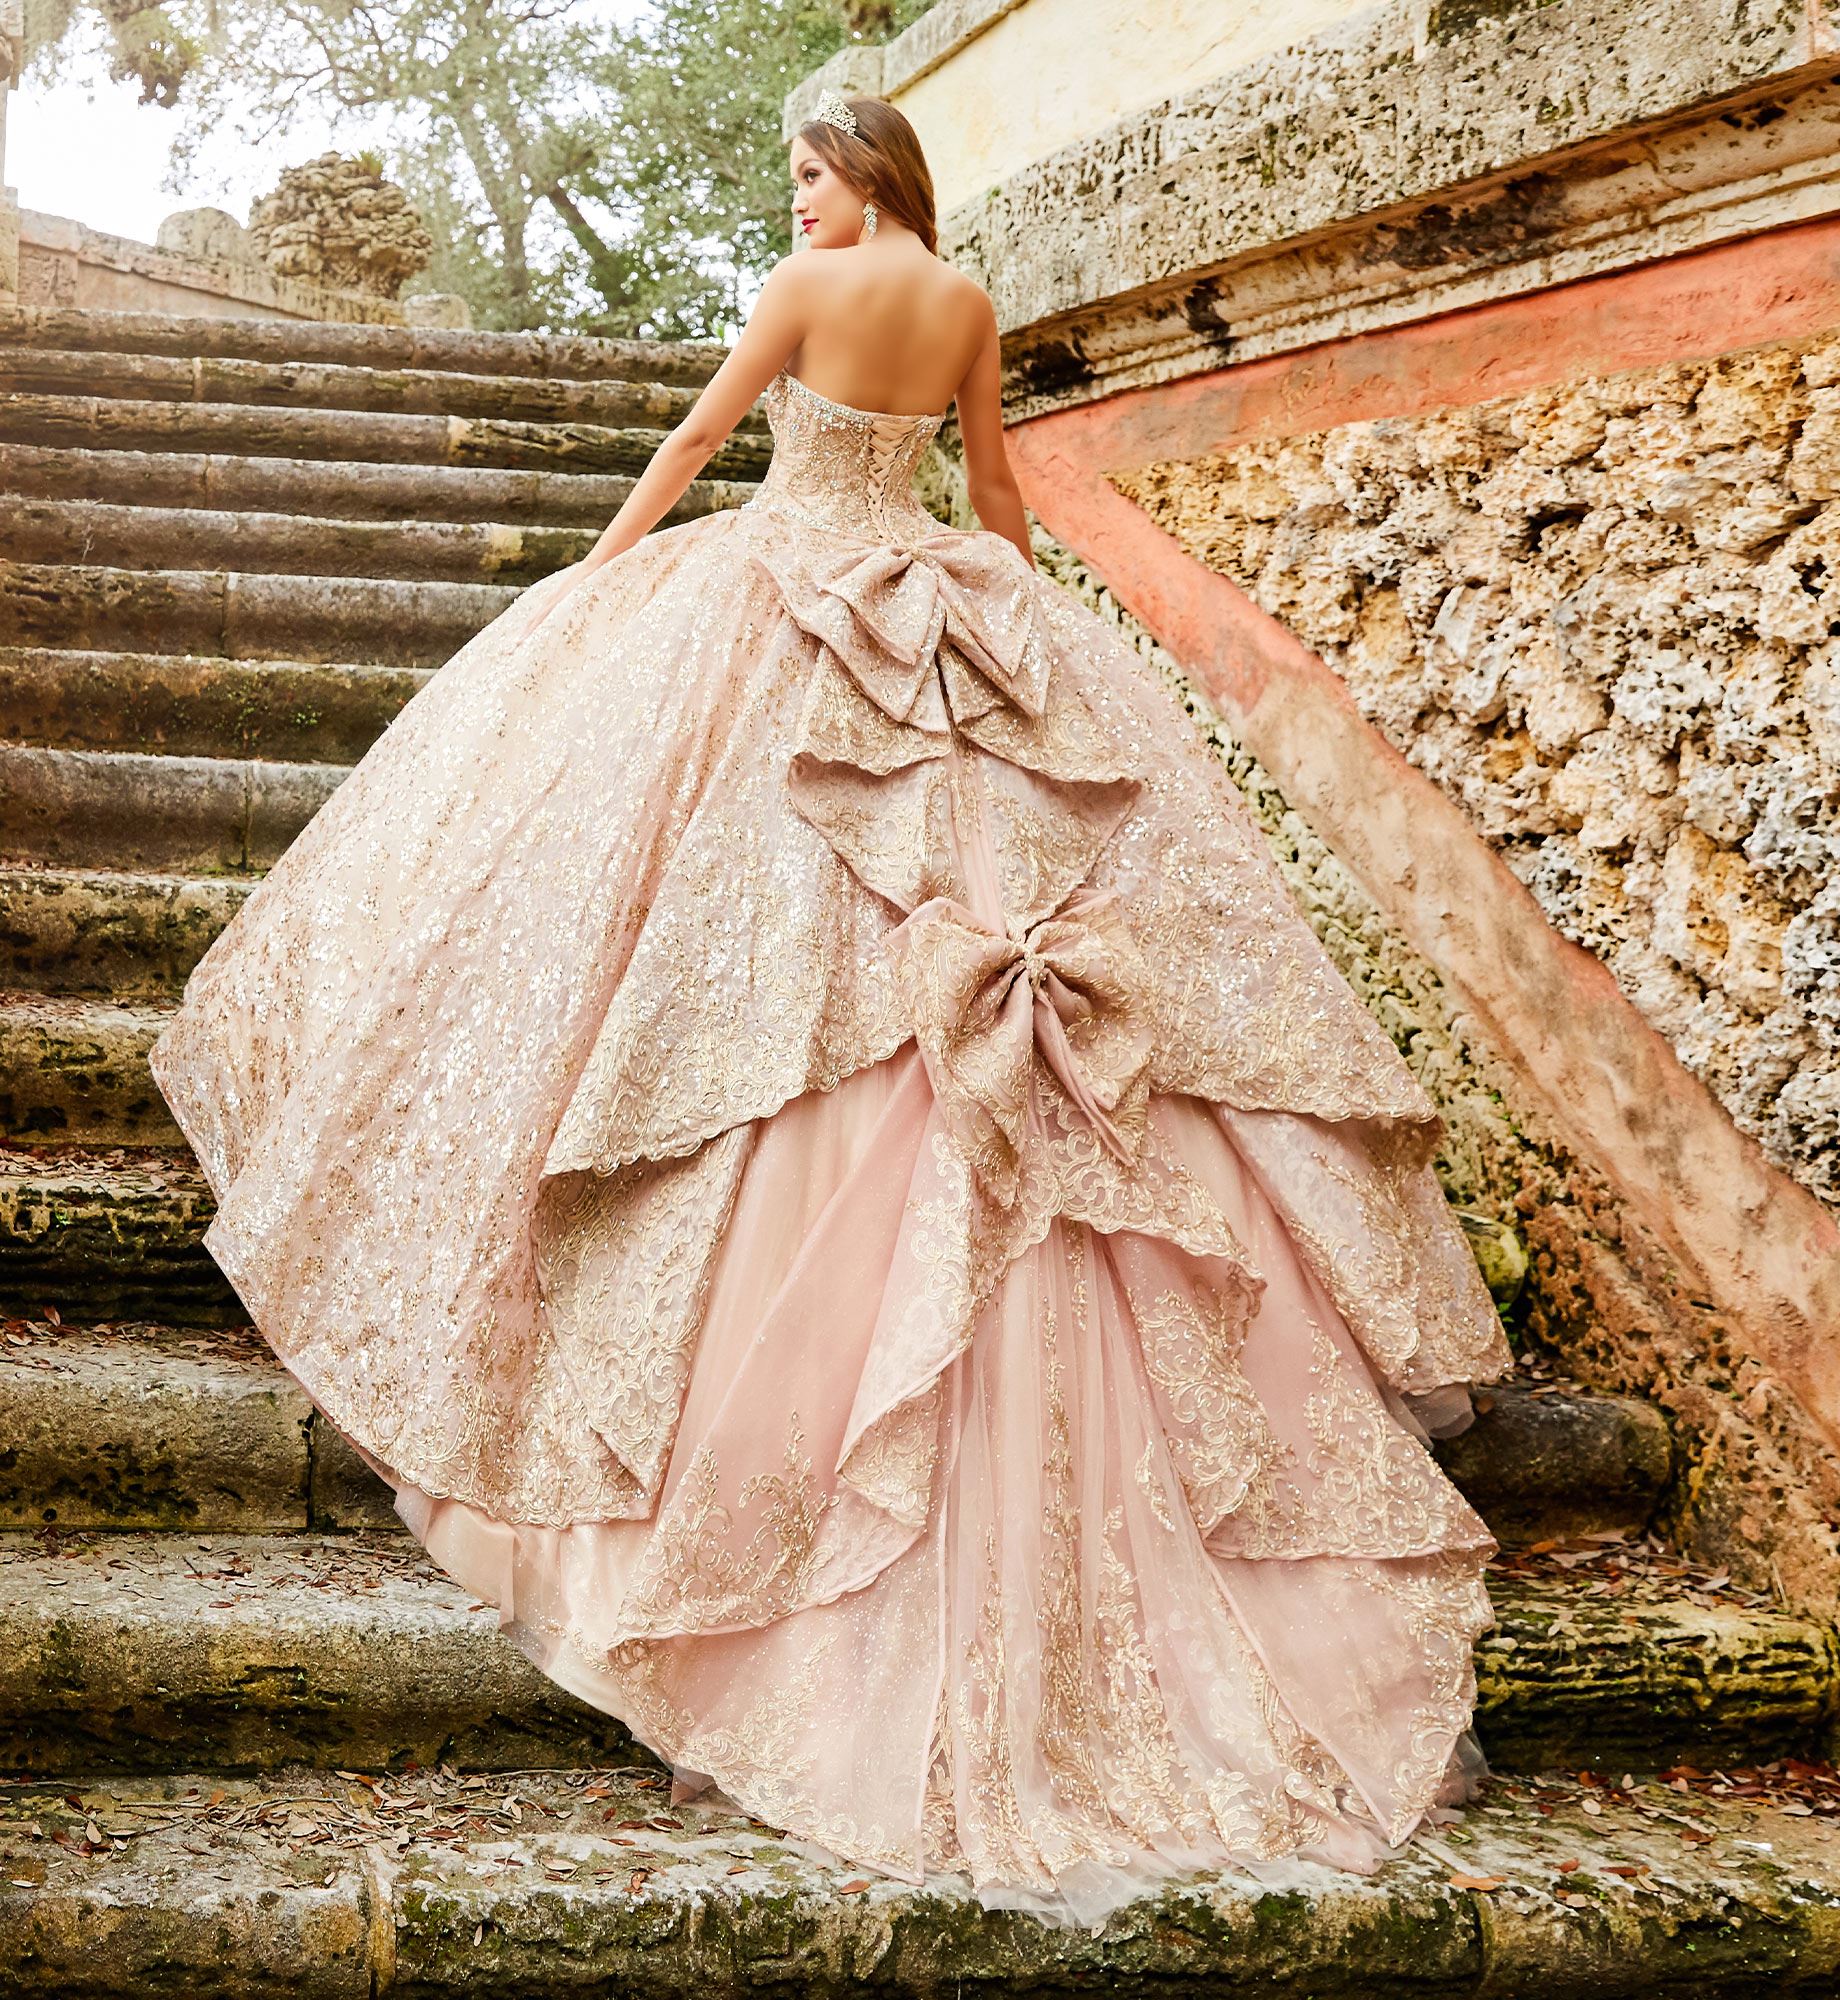 Brunette model in rose gold quinceañera dress with dramatic bows